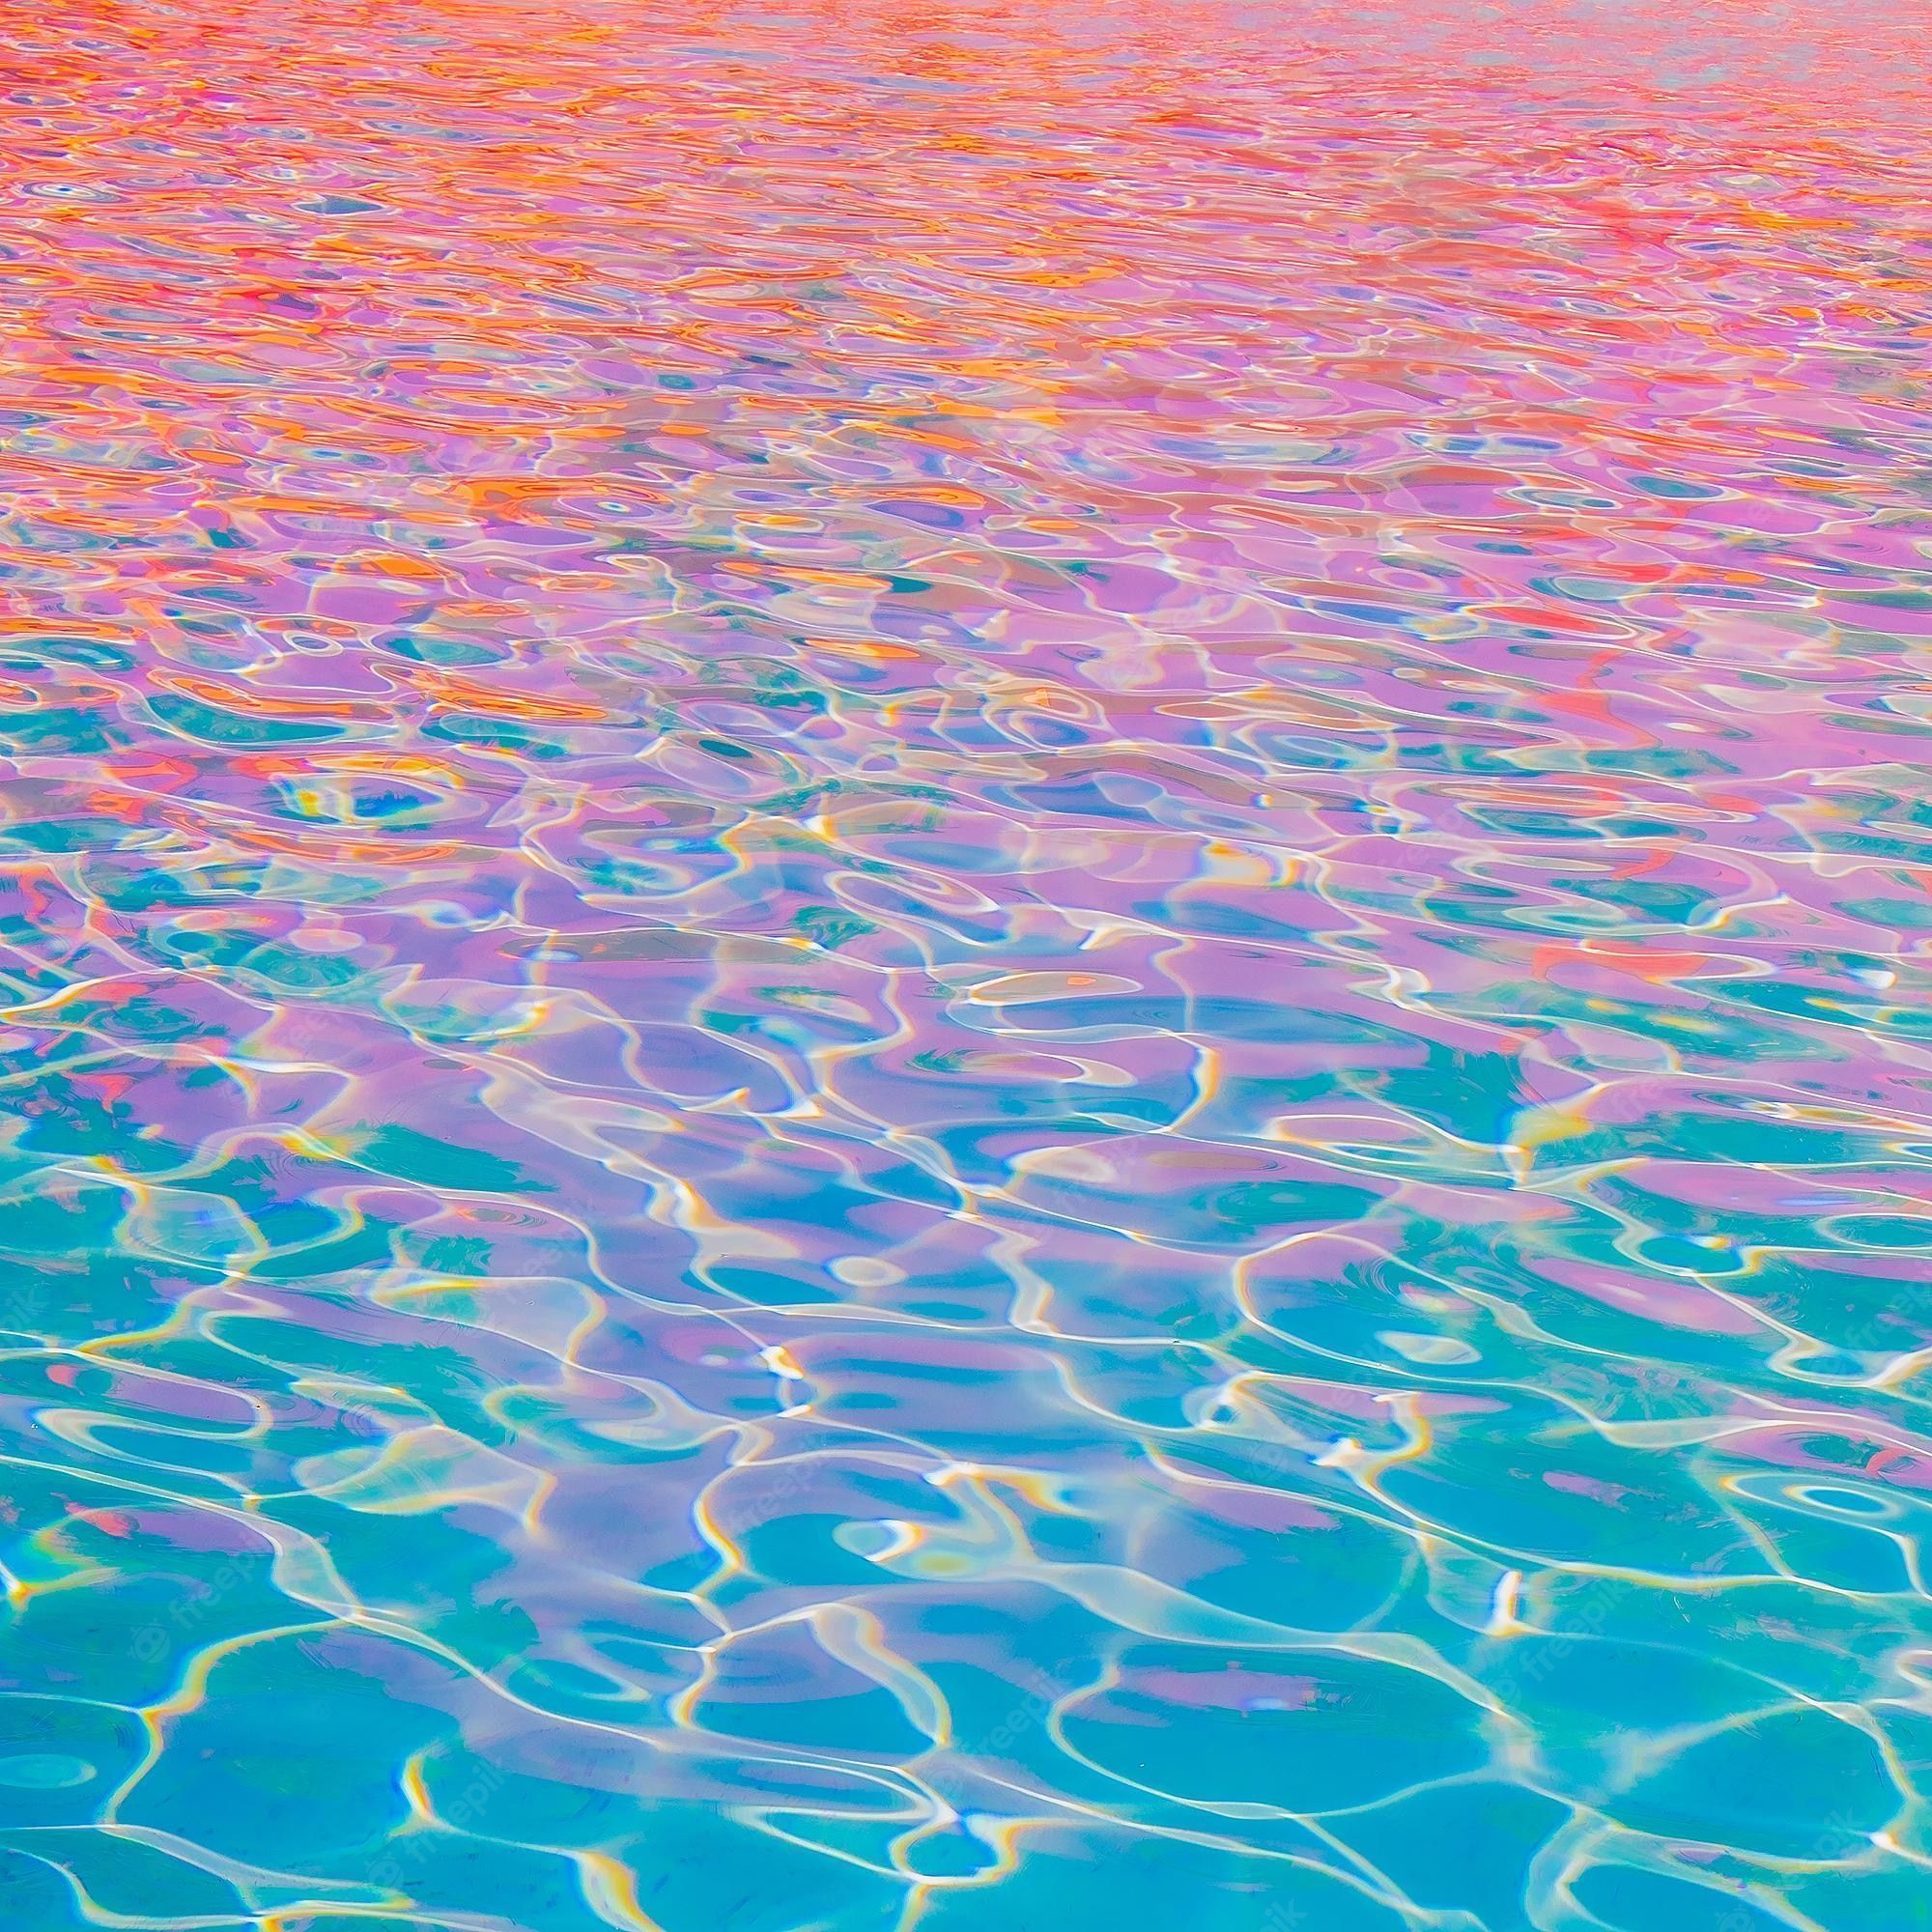 A pool with a pink and blue reflection in it - Vaporwave, swimming pool